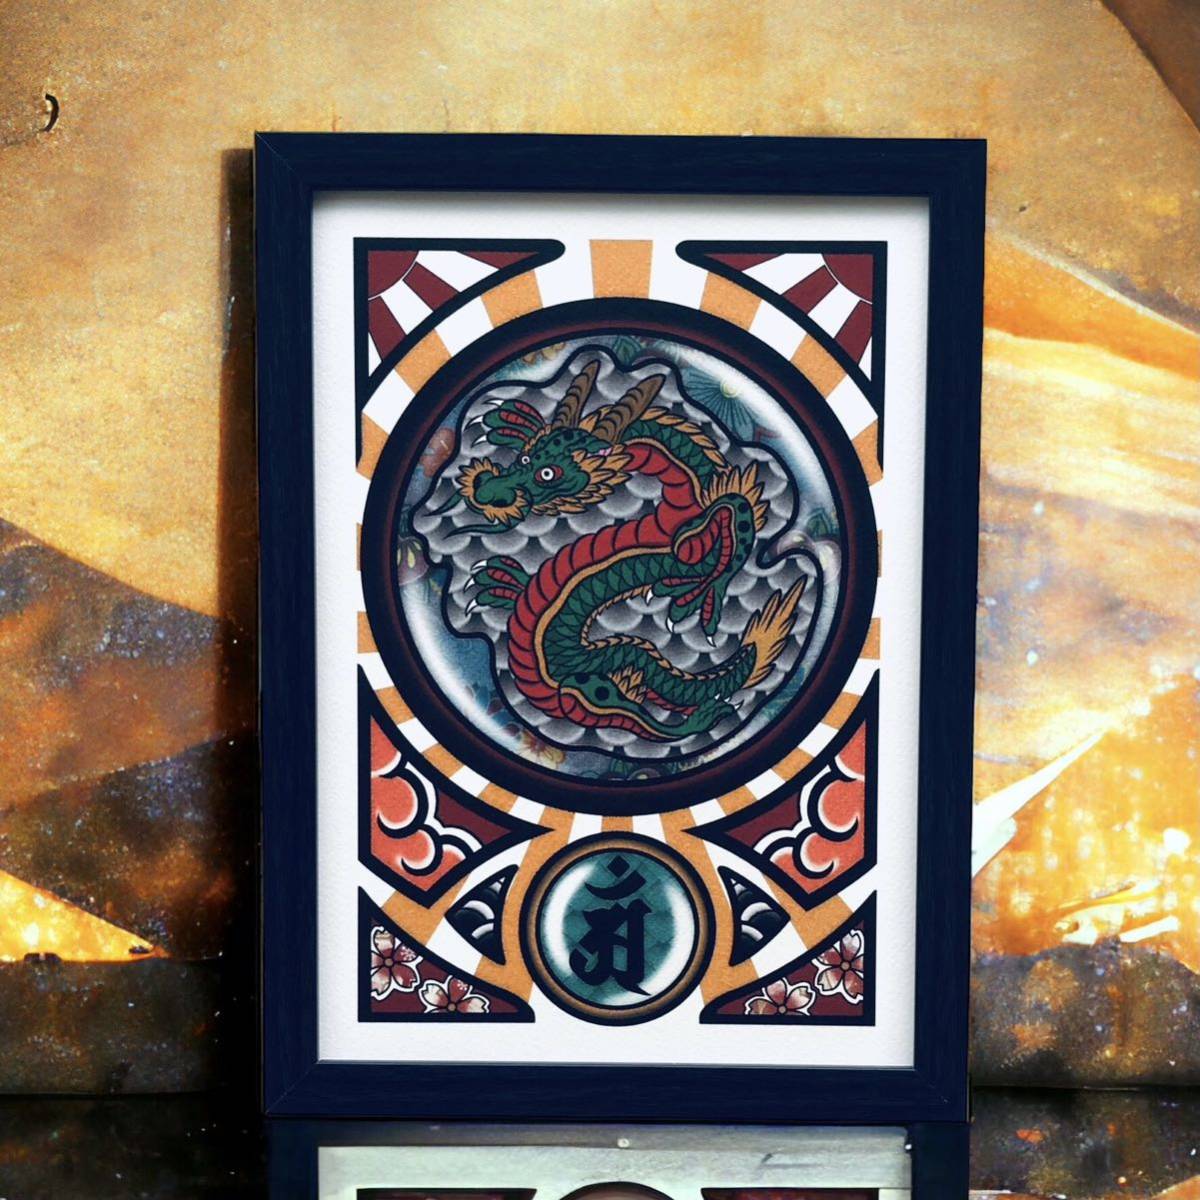 Good Luck Invitation Illustration Dragon Painting Zodiac Year of the Dragon Year of the Snake Sanskrit Anne A4 Size Black Frame Art Frame Framed Dragon Amulet Amulet Increase Financial Luck, painting, Japanese painting, others